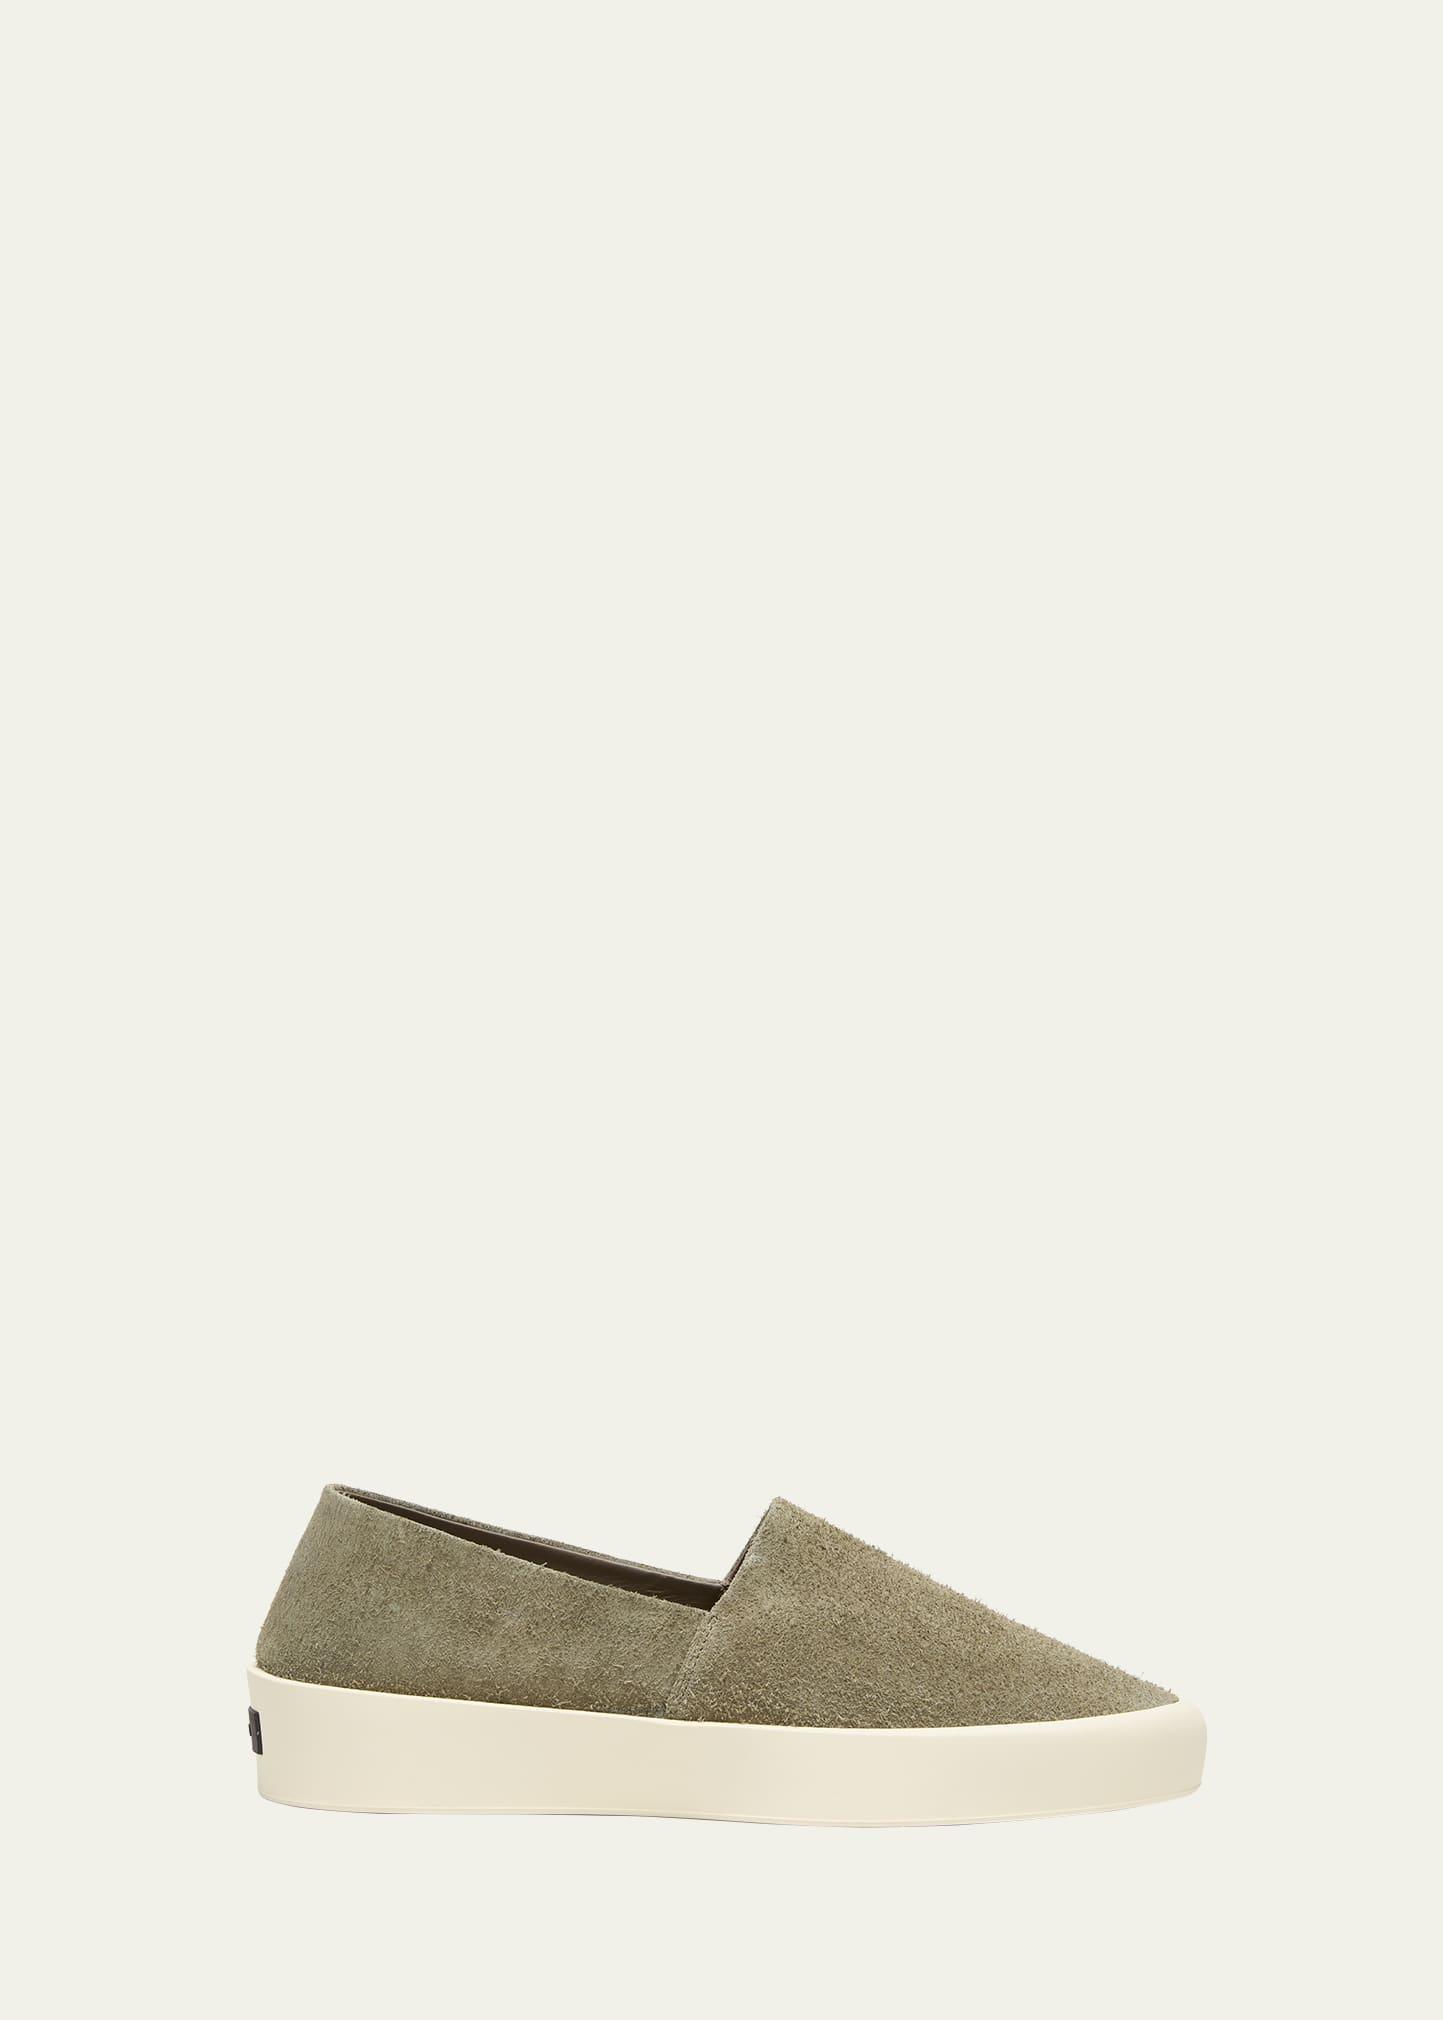 Mens Hairy Suede Espadrilles Product Image